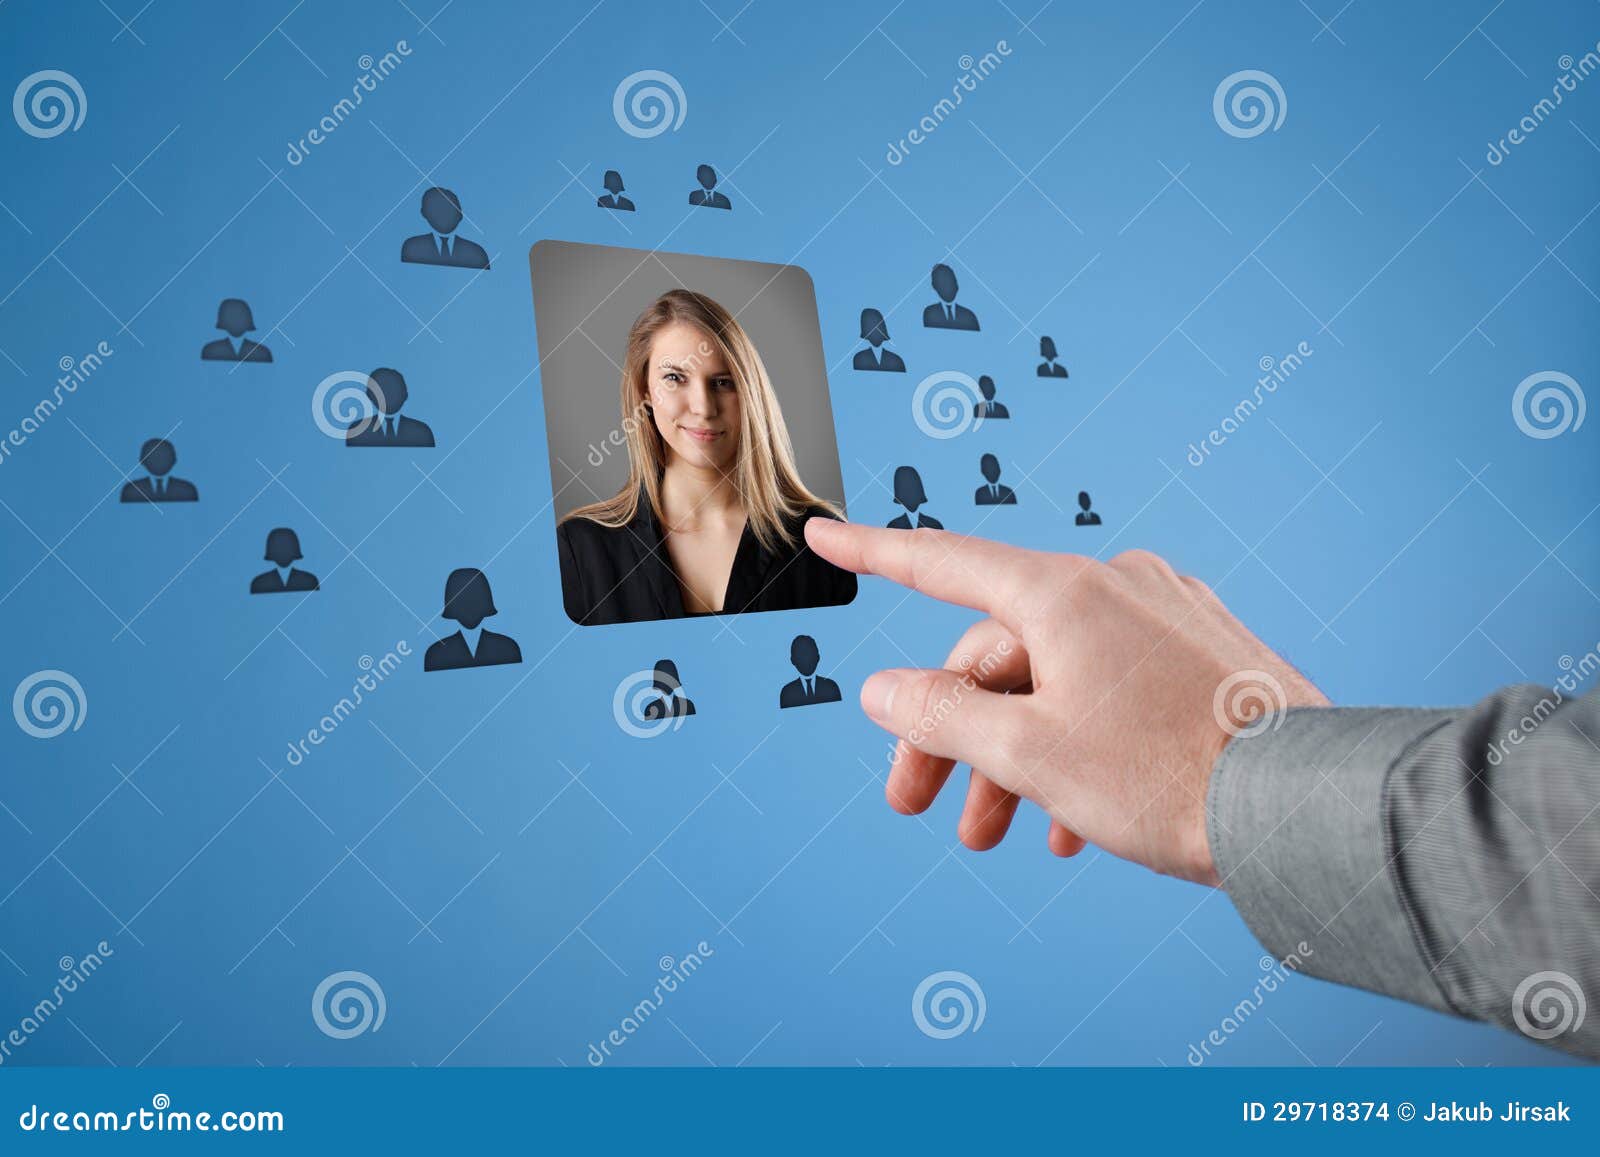 Linkedin Login Page editorial stock photo. Image of network - 33609458